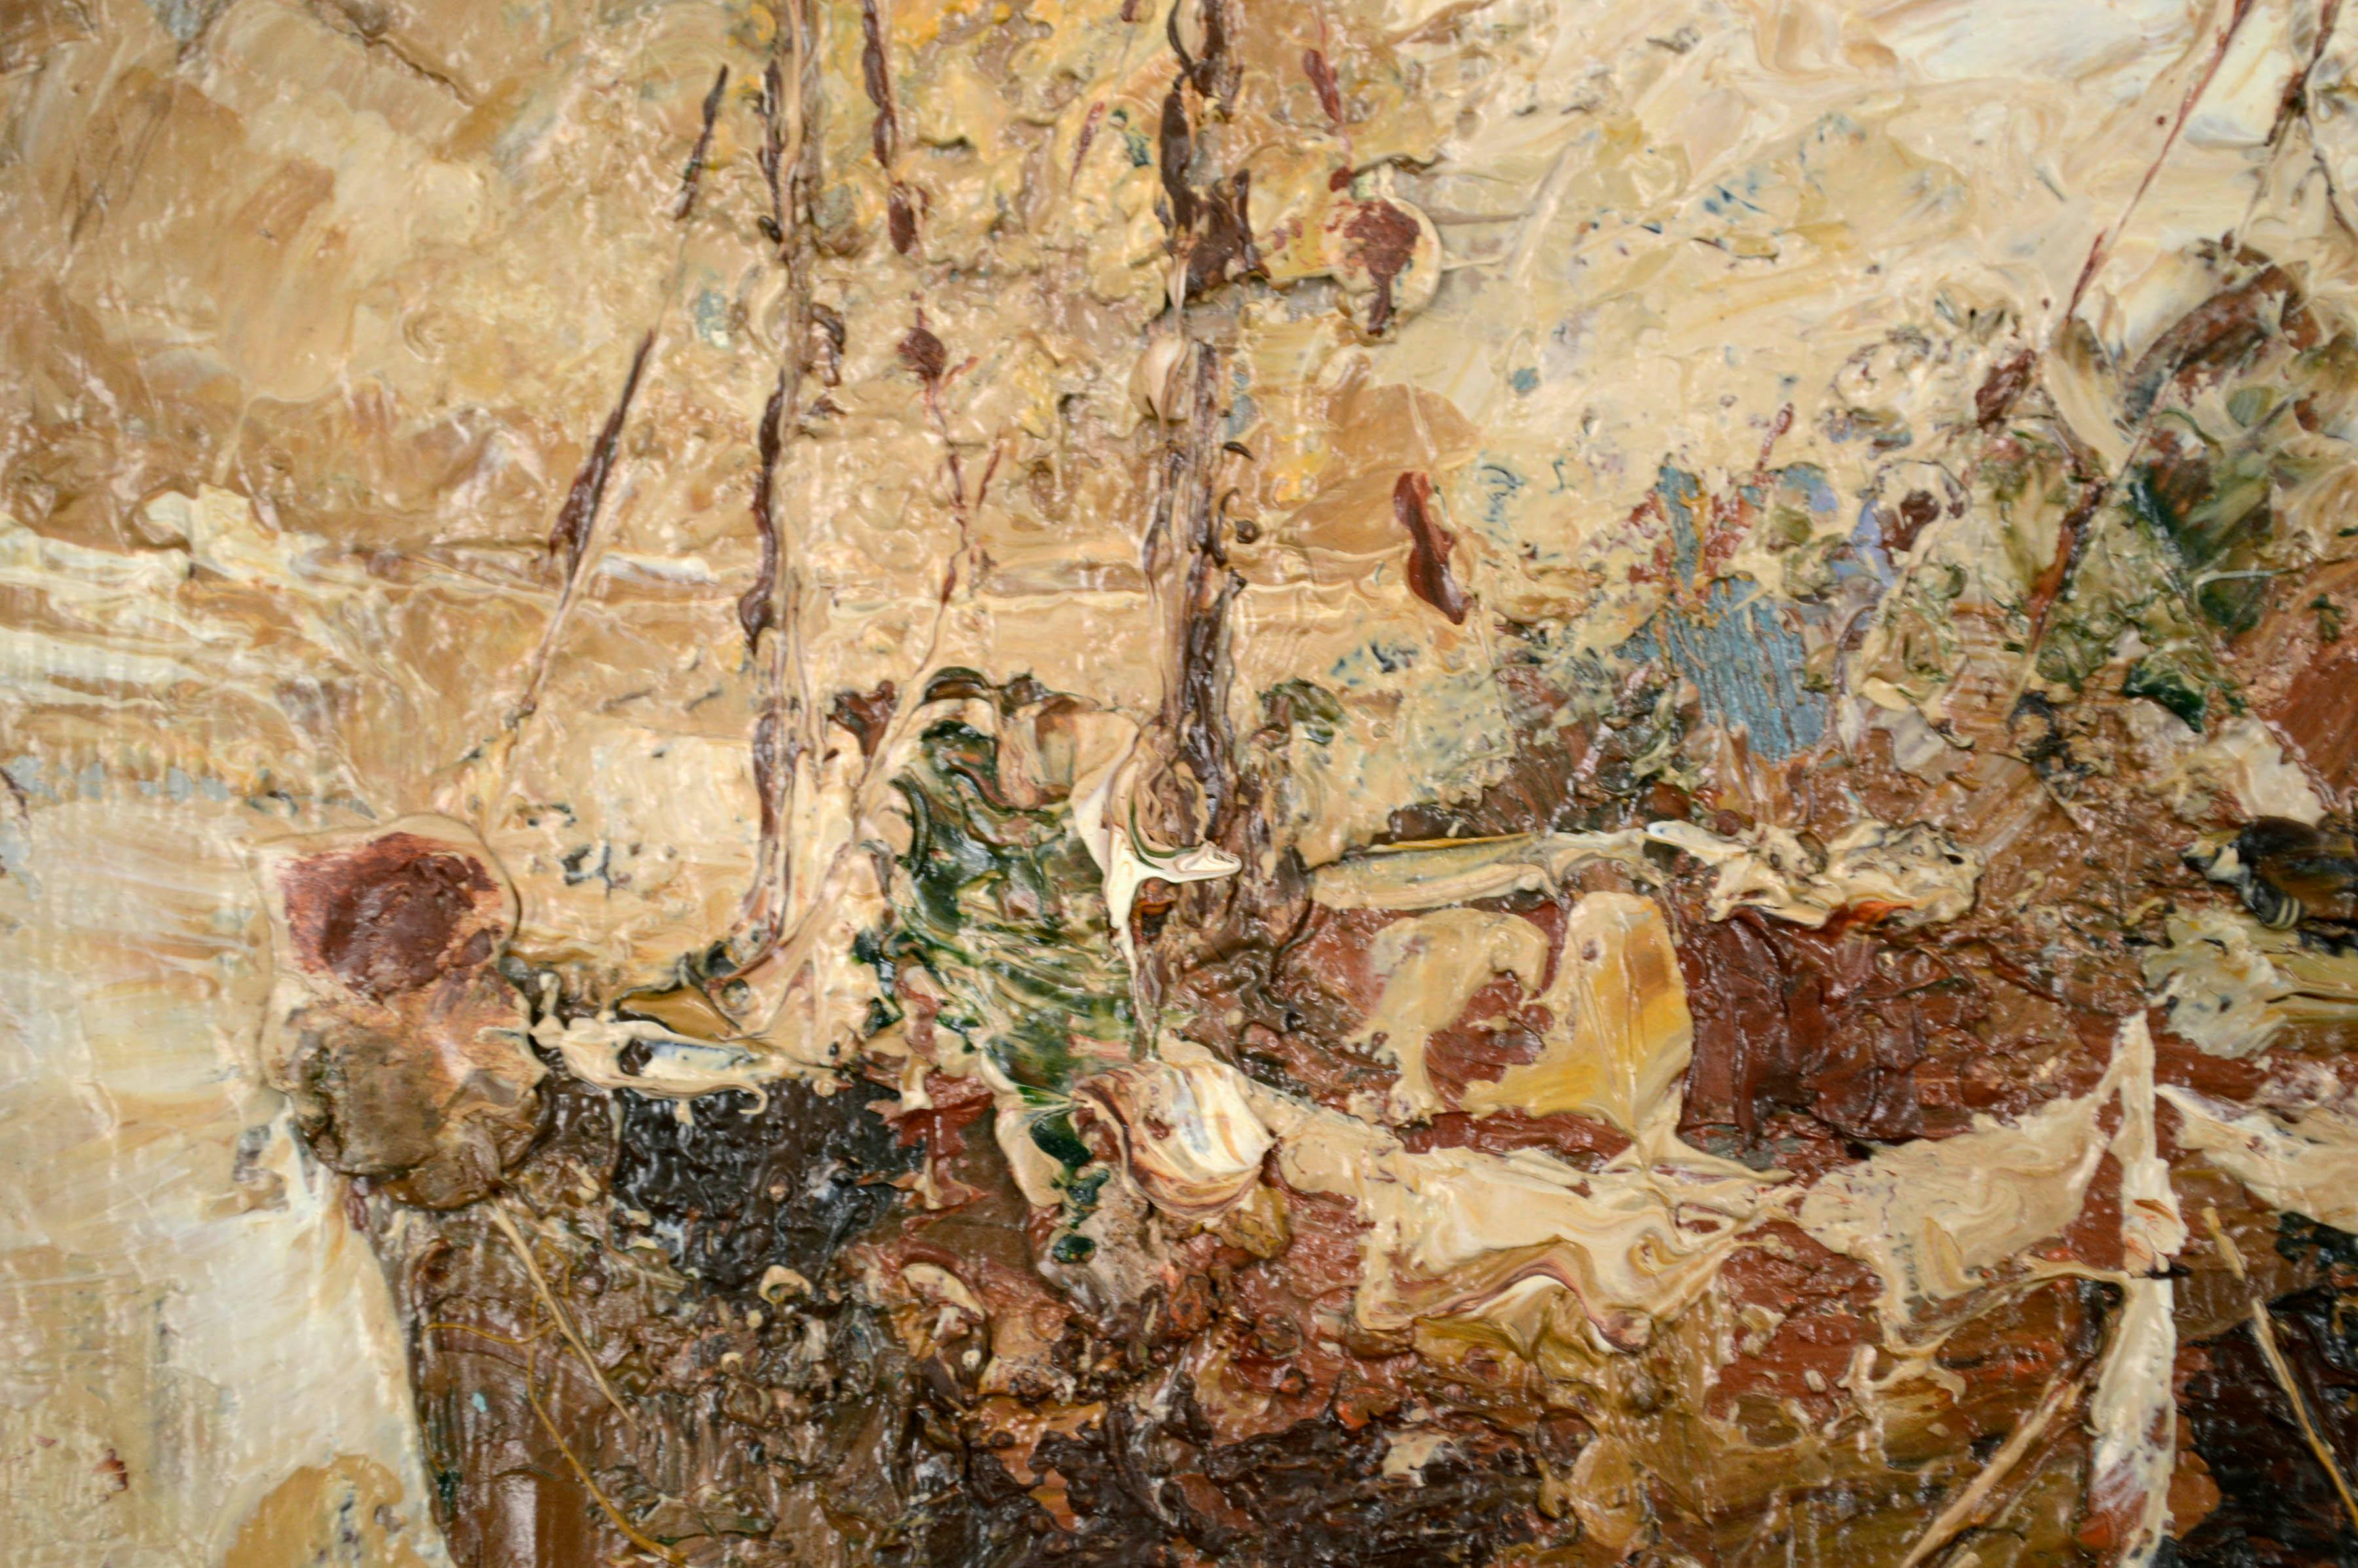 Beautiful mid-century textural impasto landscape, in a monochromatic earthtone palette, of fishing boats docked at a wharf by unknown artist Barton, c.1950s. The heavy texture is created using the impasto technique, which increases the depth and